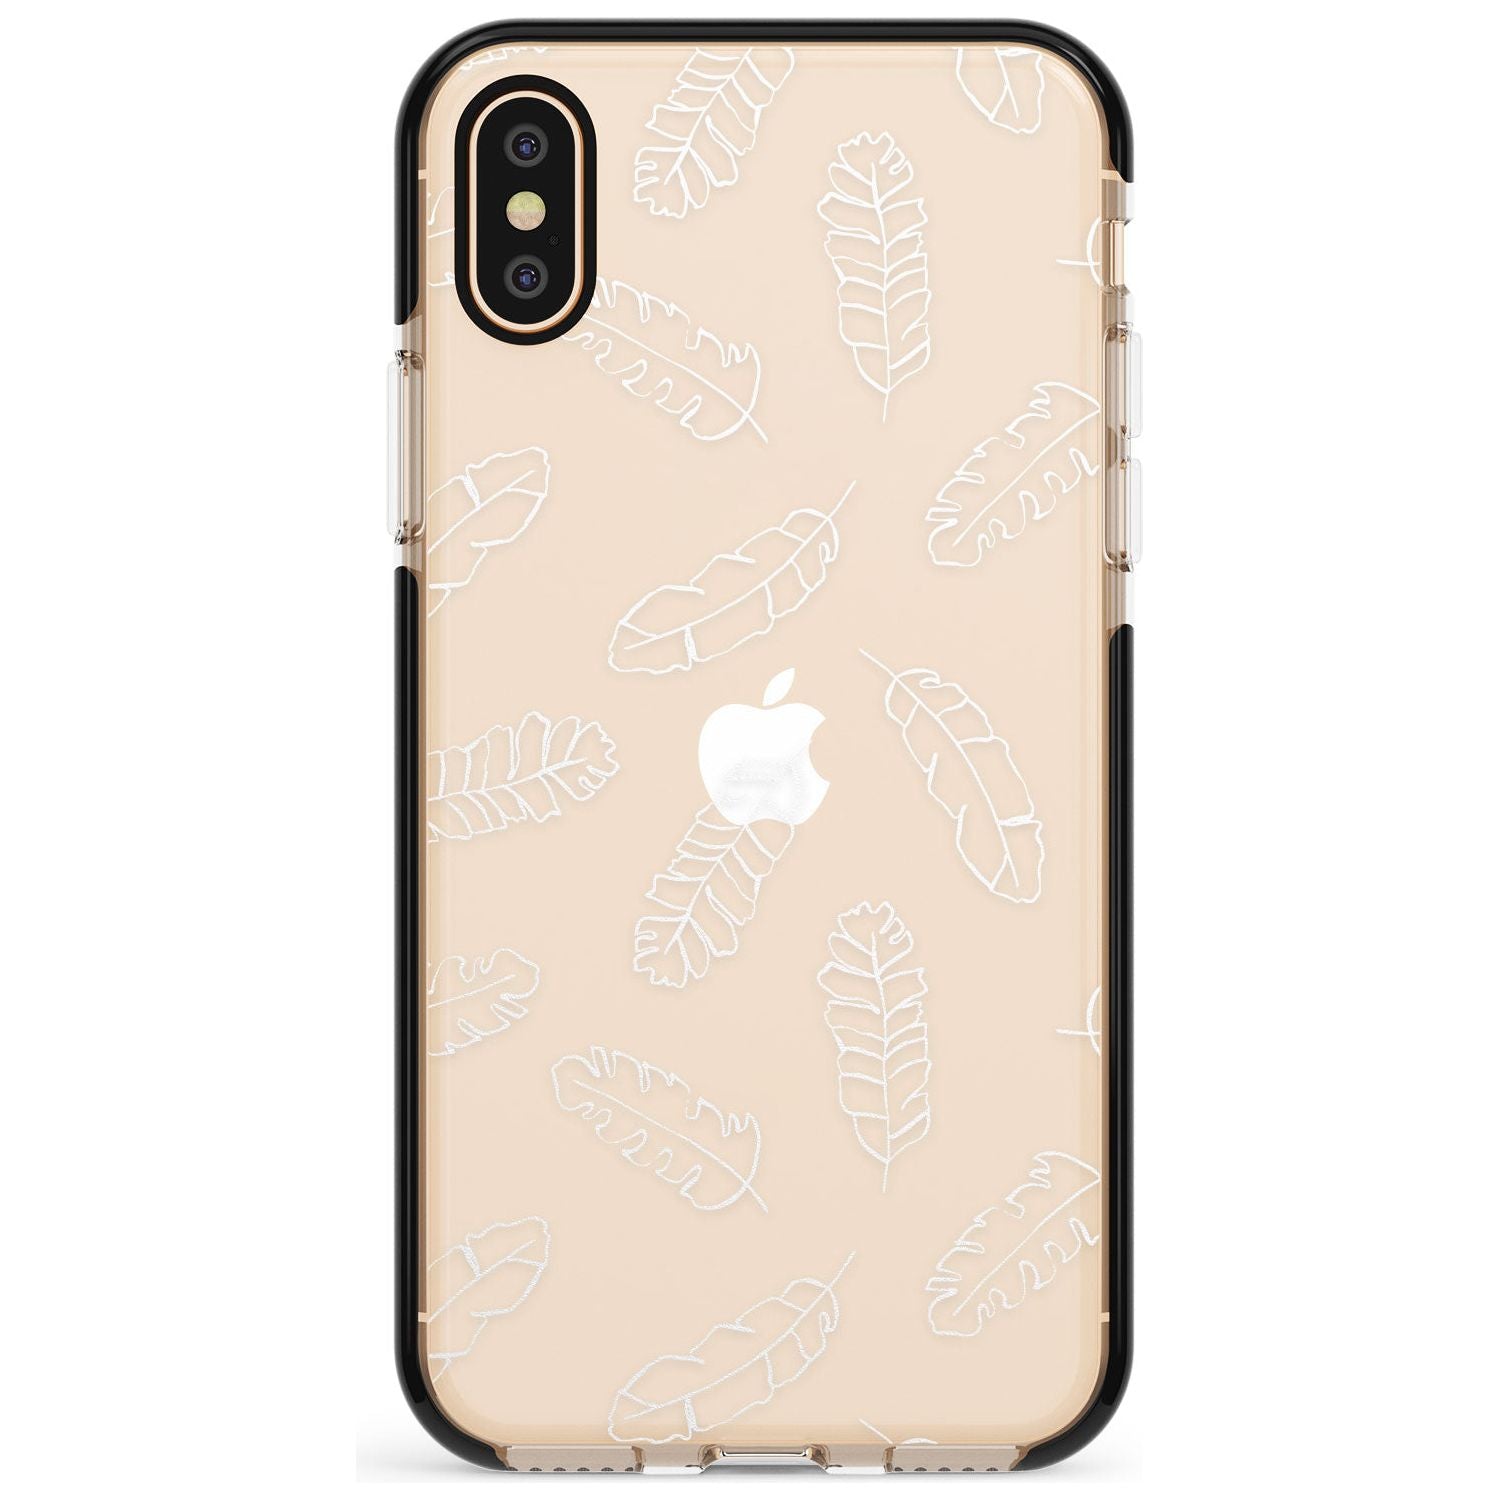 Clear Botanical Designs: Palm Leaves Pink Fade Impact Phone Case for iPhone X XS Max XR